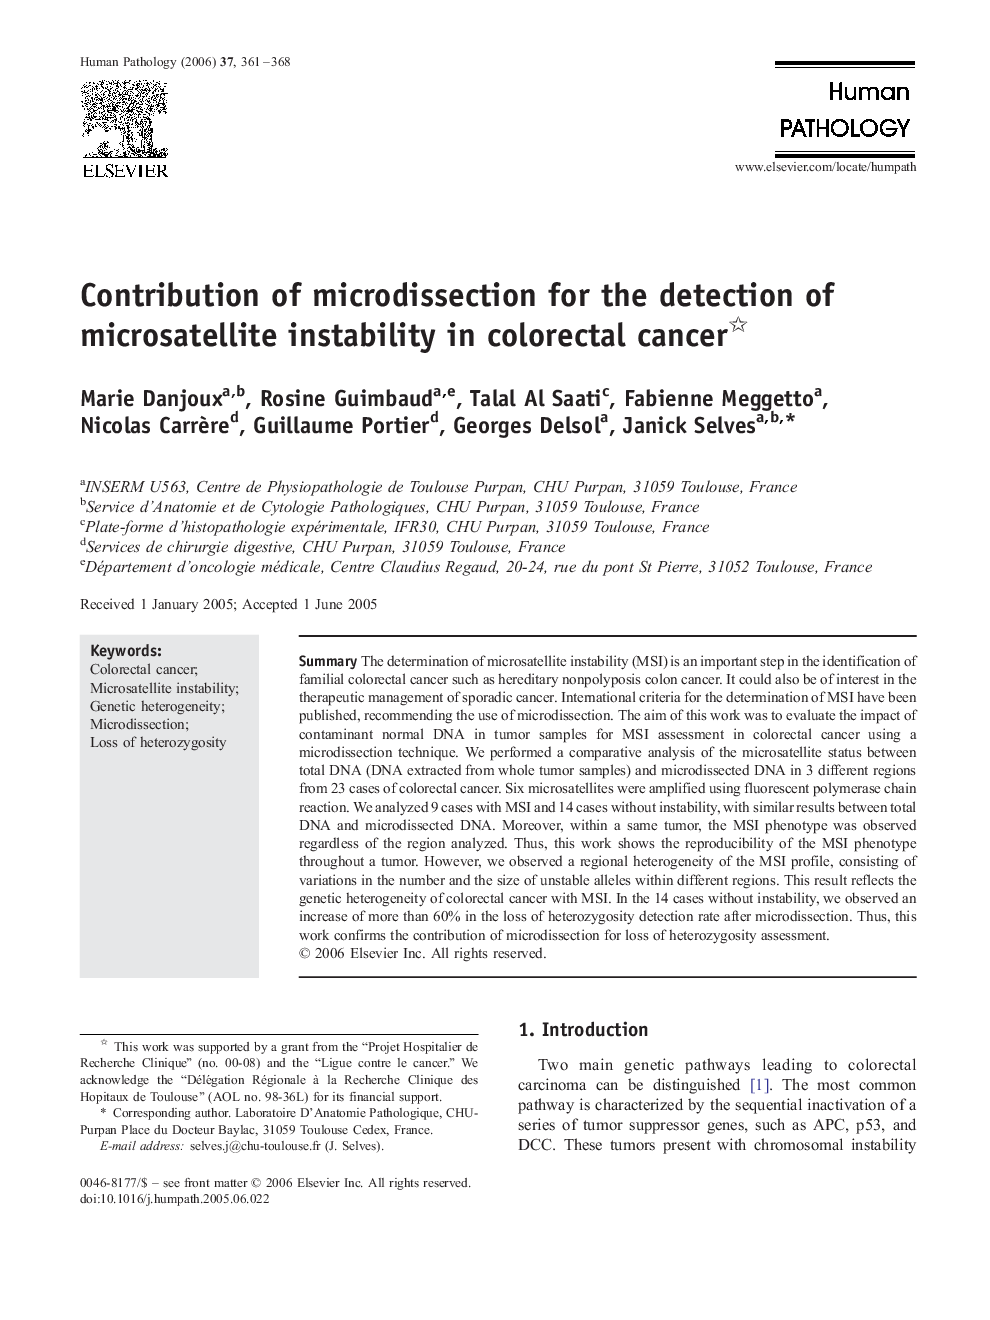 Contribution of microdissection for the detection of microsatellite instability in colorectal cancer 